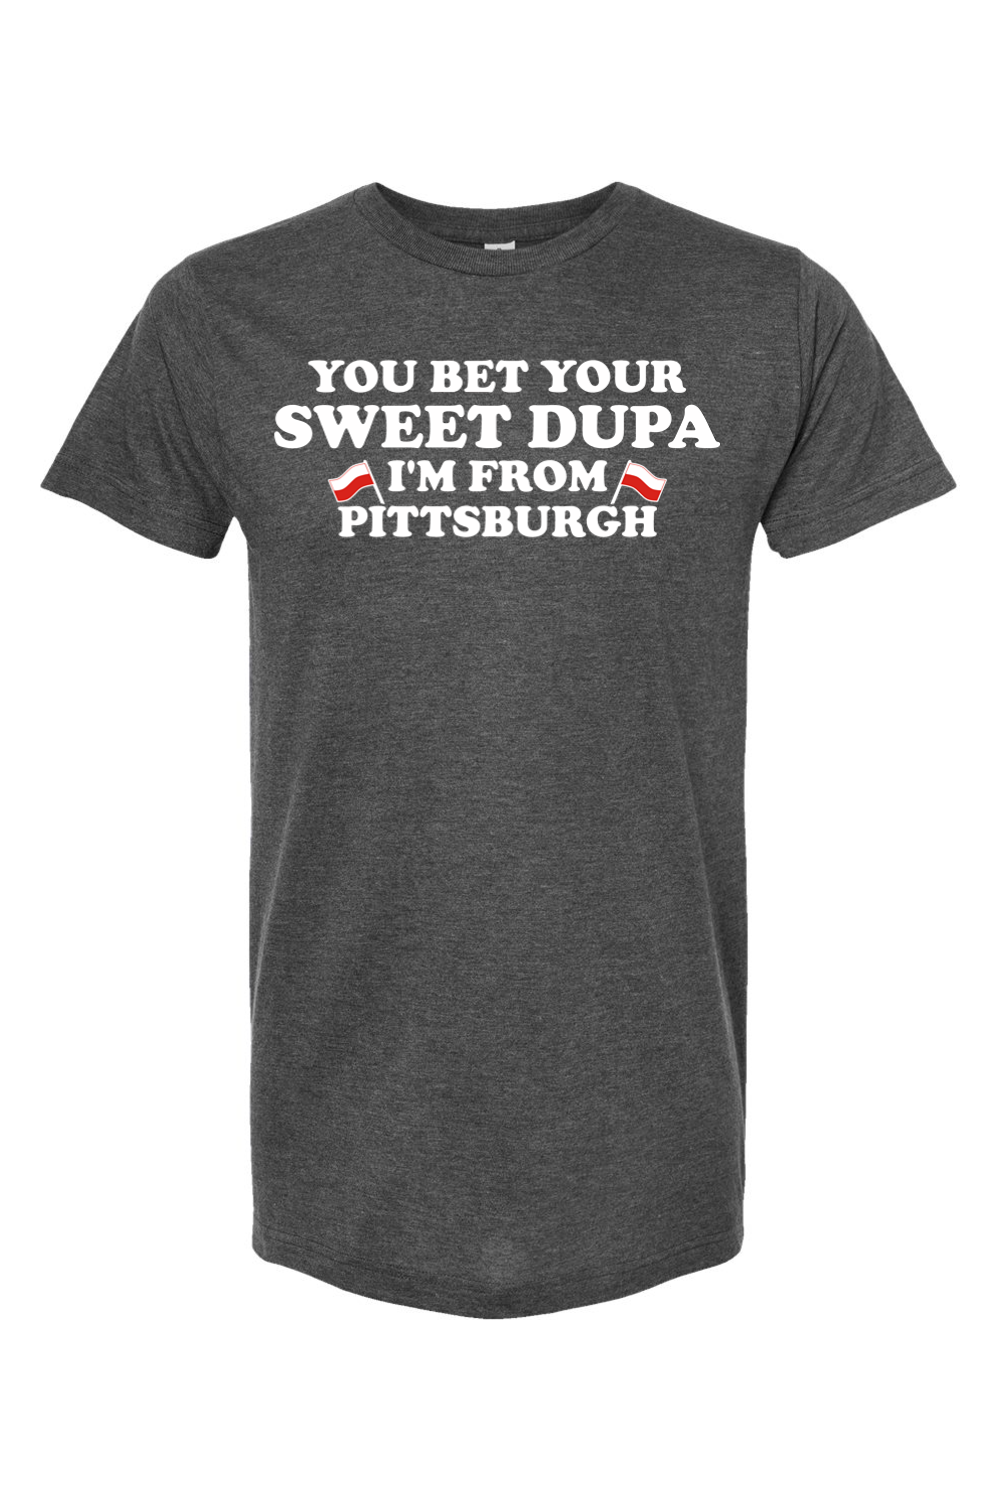 You Bet Your Sweet Dupa I'm From Pittsburgh - Yinzylvania